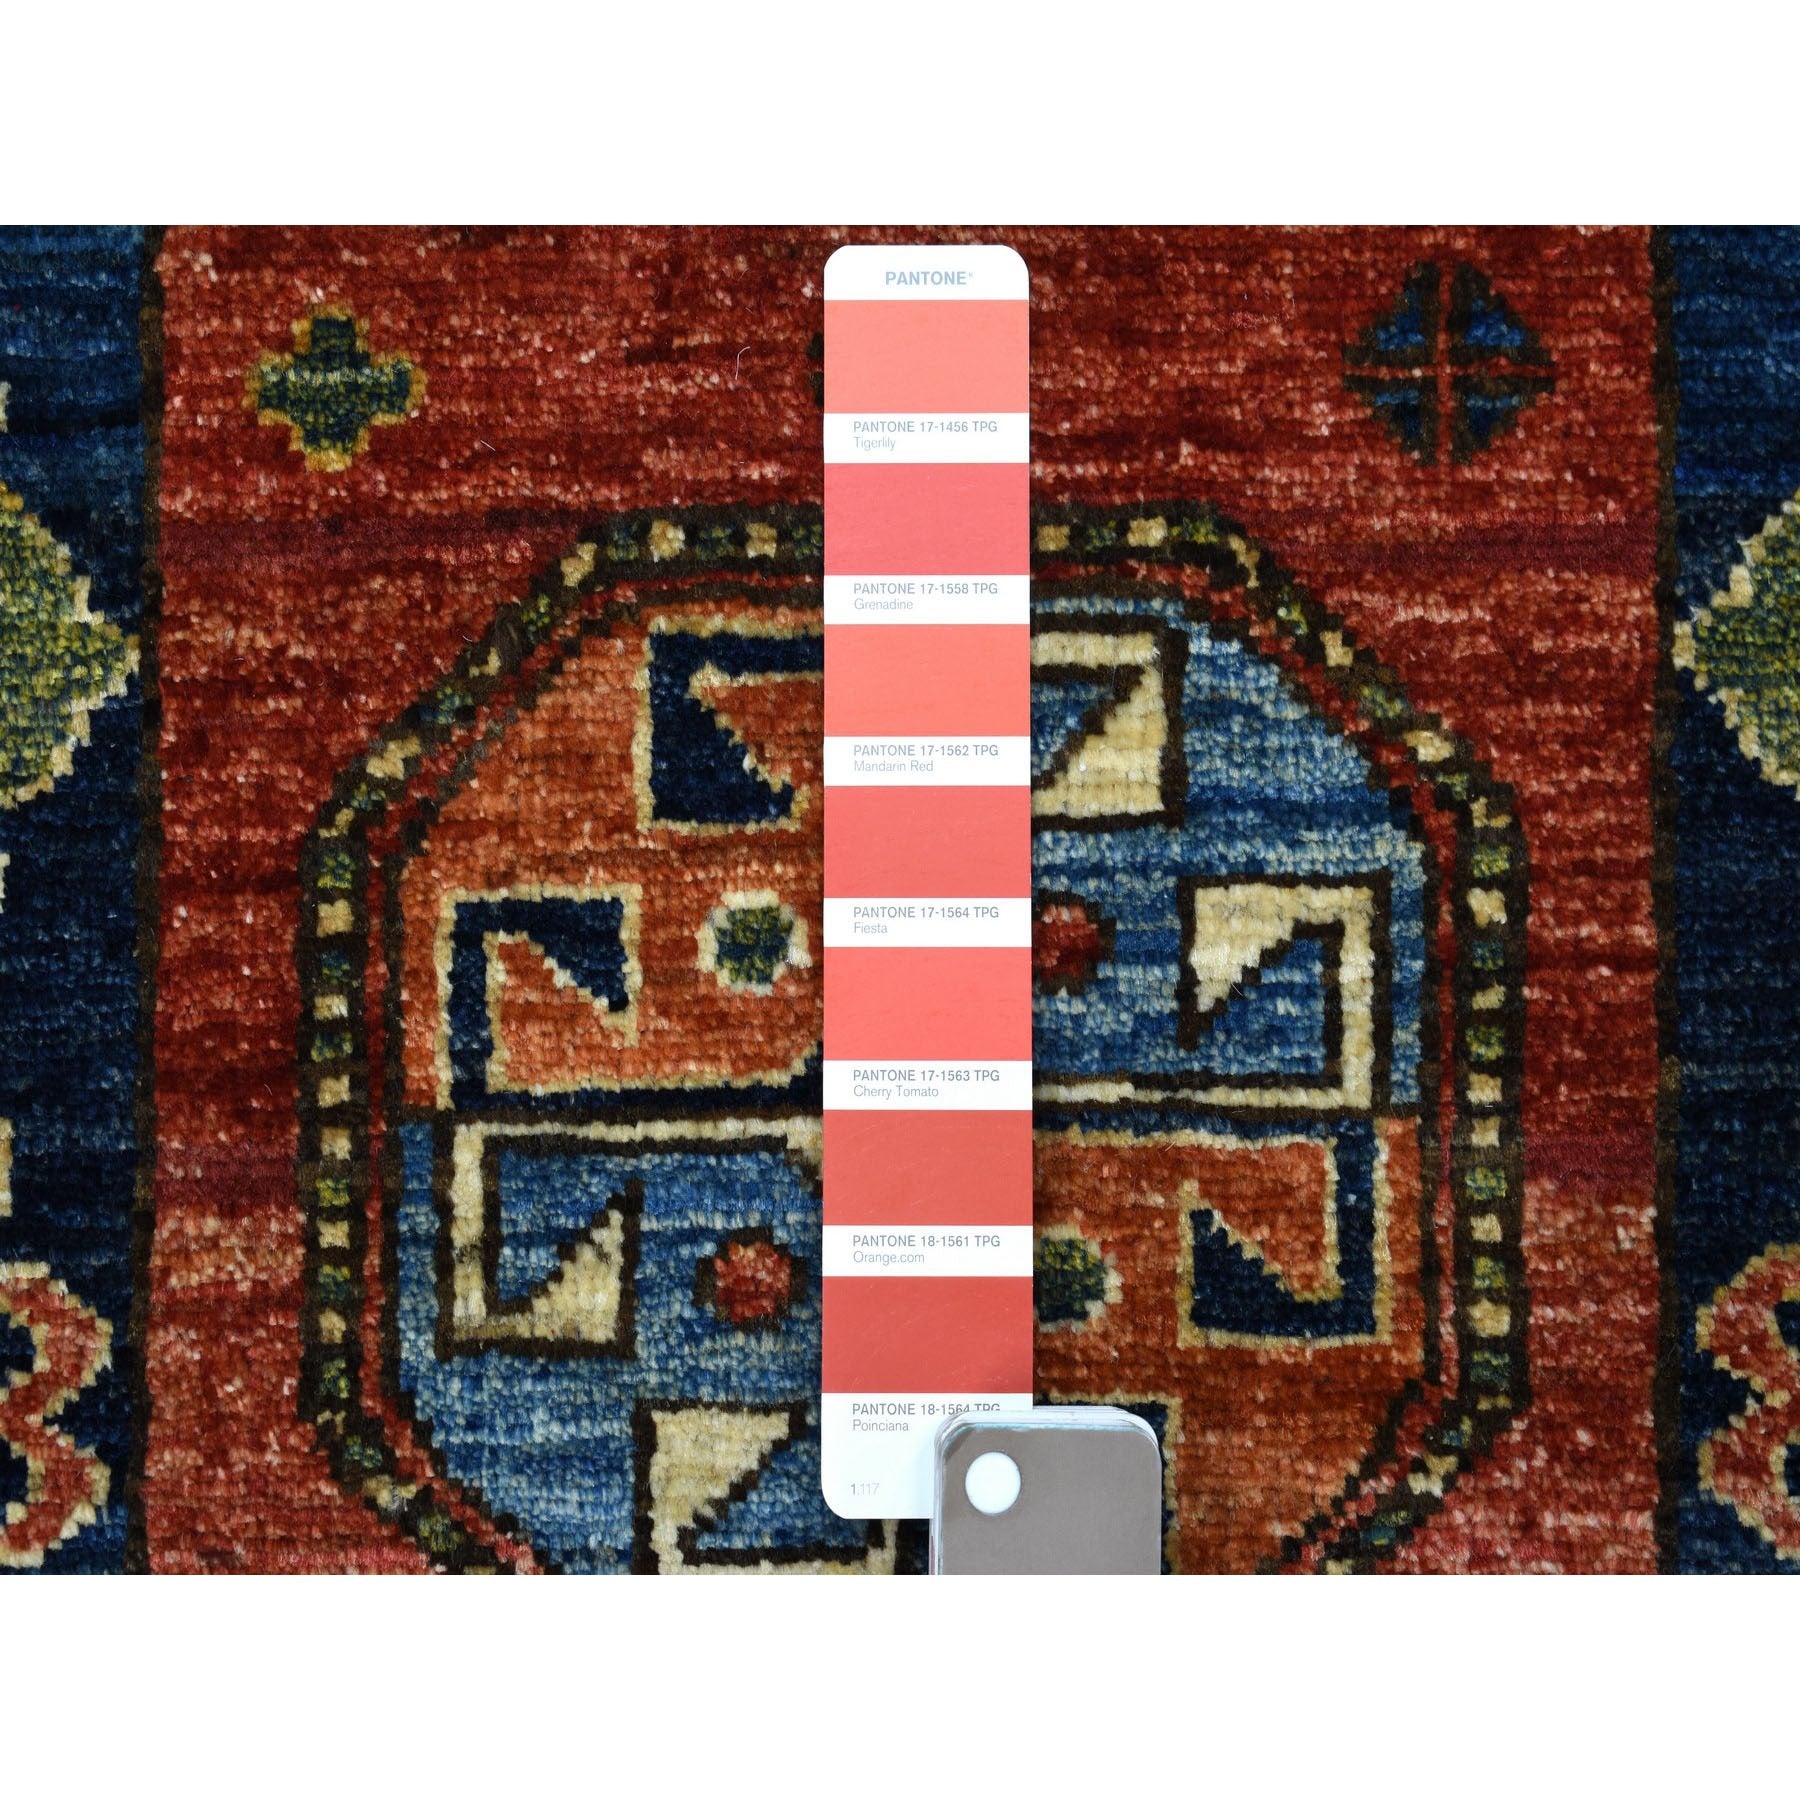 Hand Knotted Tribal Area Rug > Design# CCSR56742 > Size: 2'-1" x 2'-10"